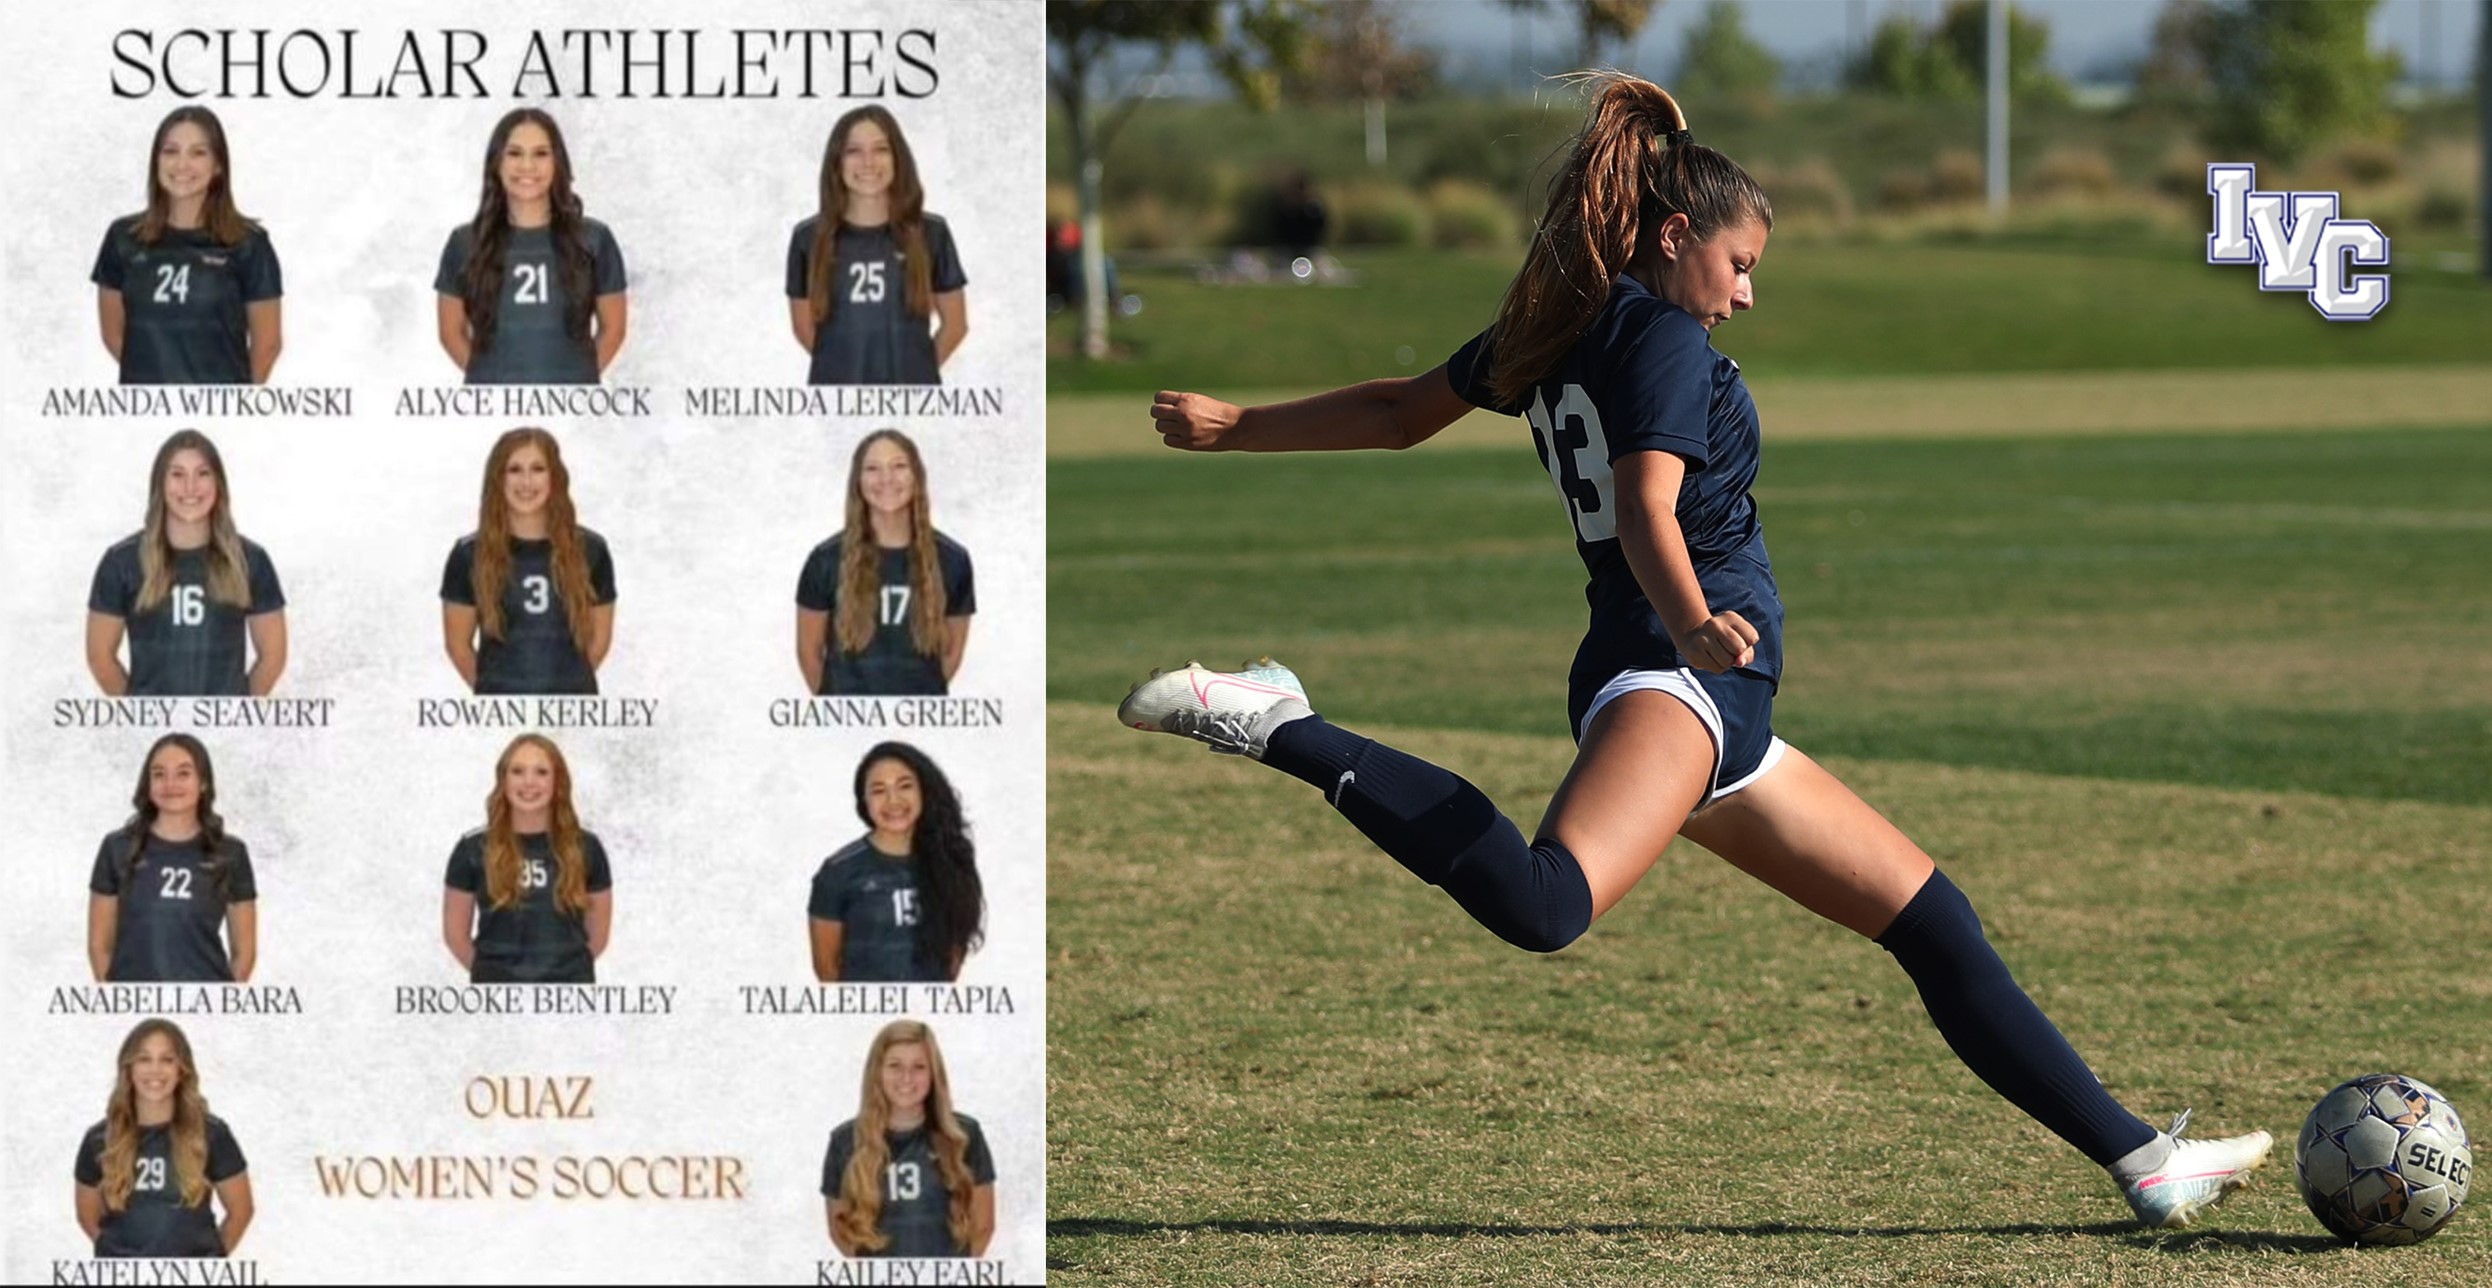 Fomer soccer player Kailey Earl named scholar athlete at OUAZ